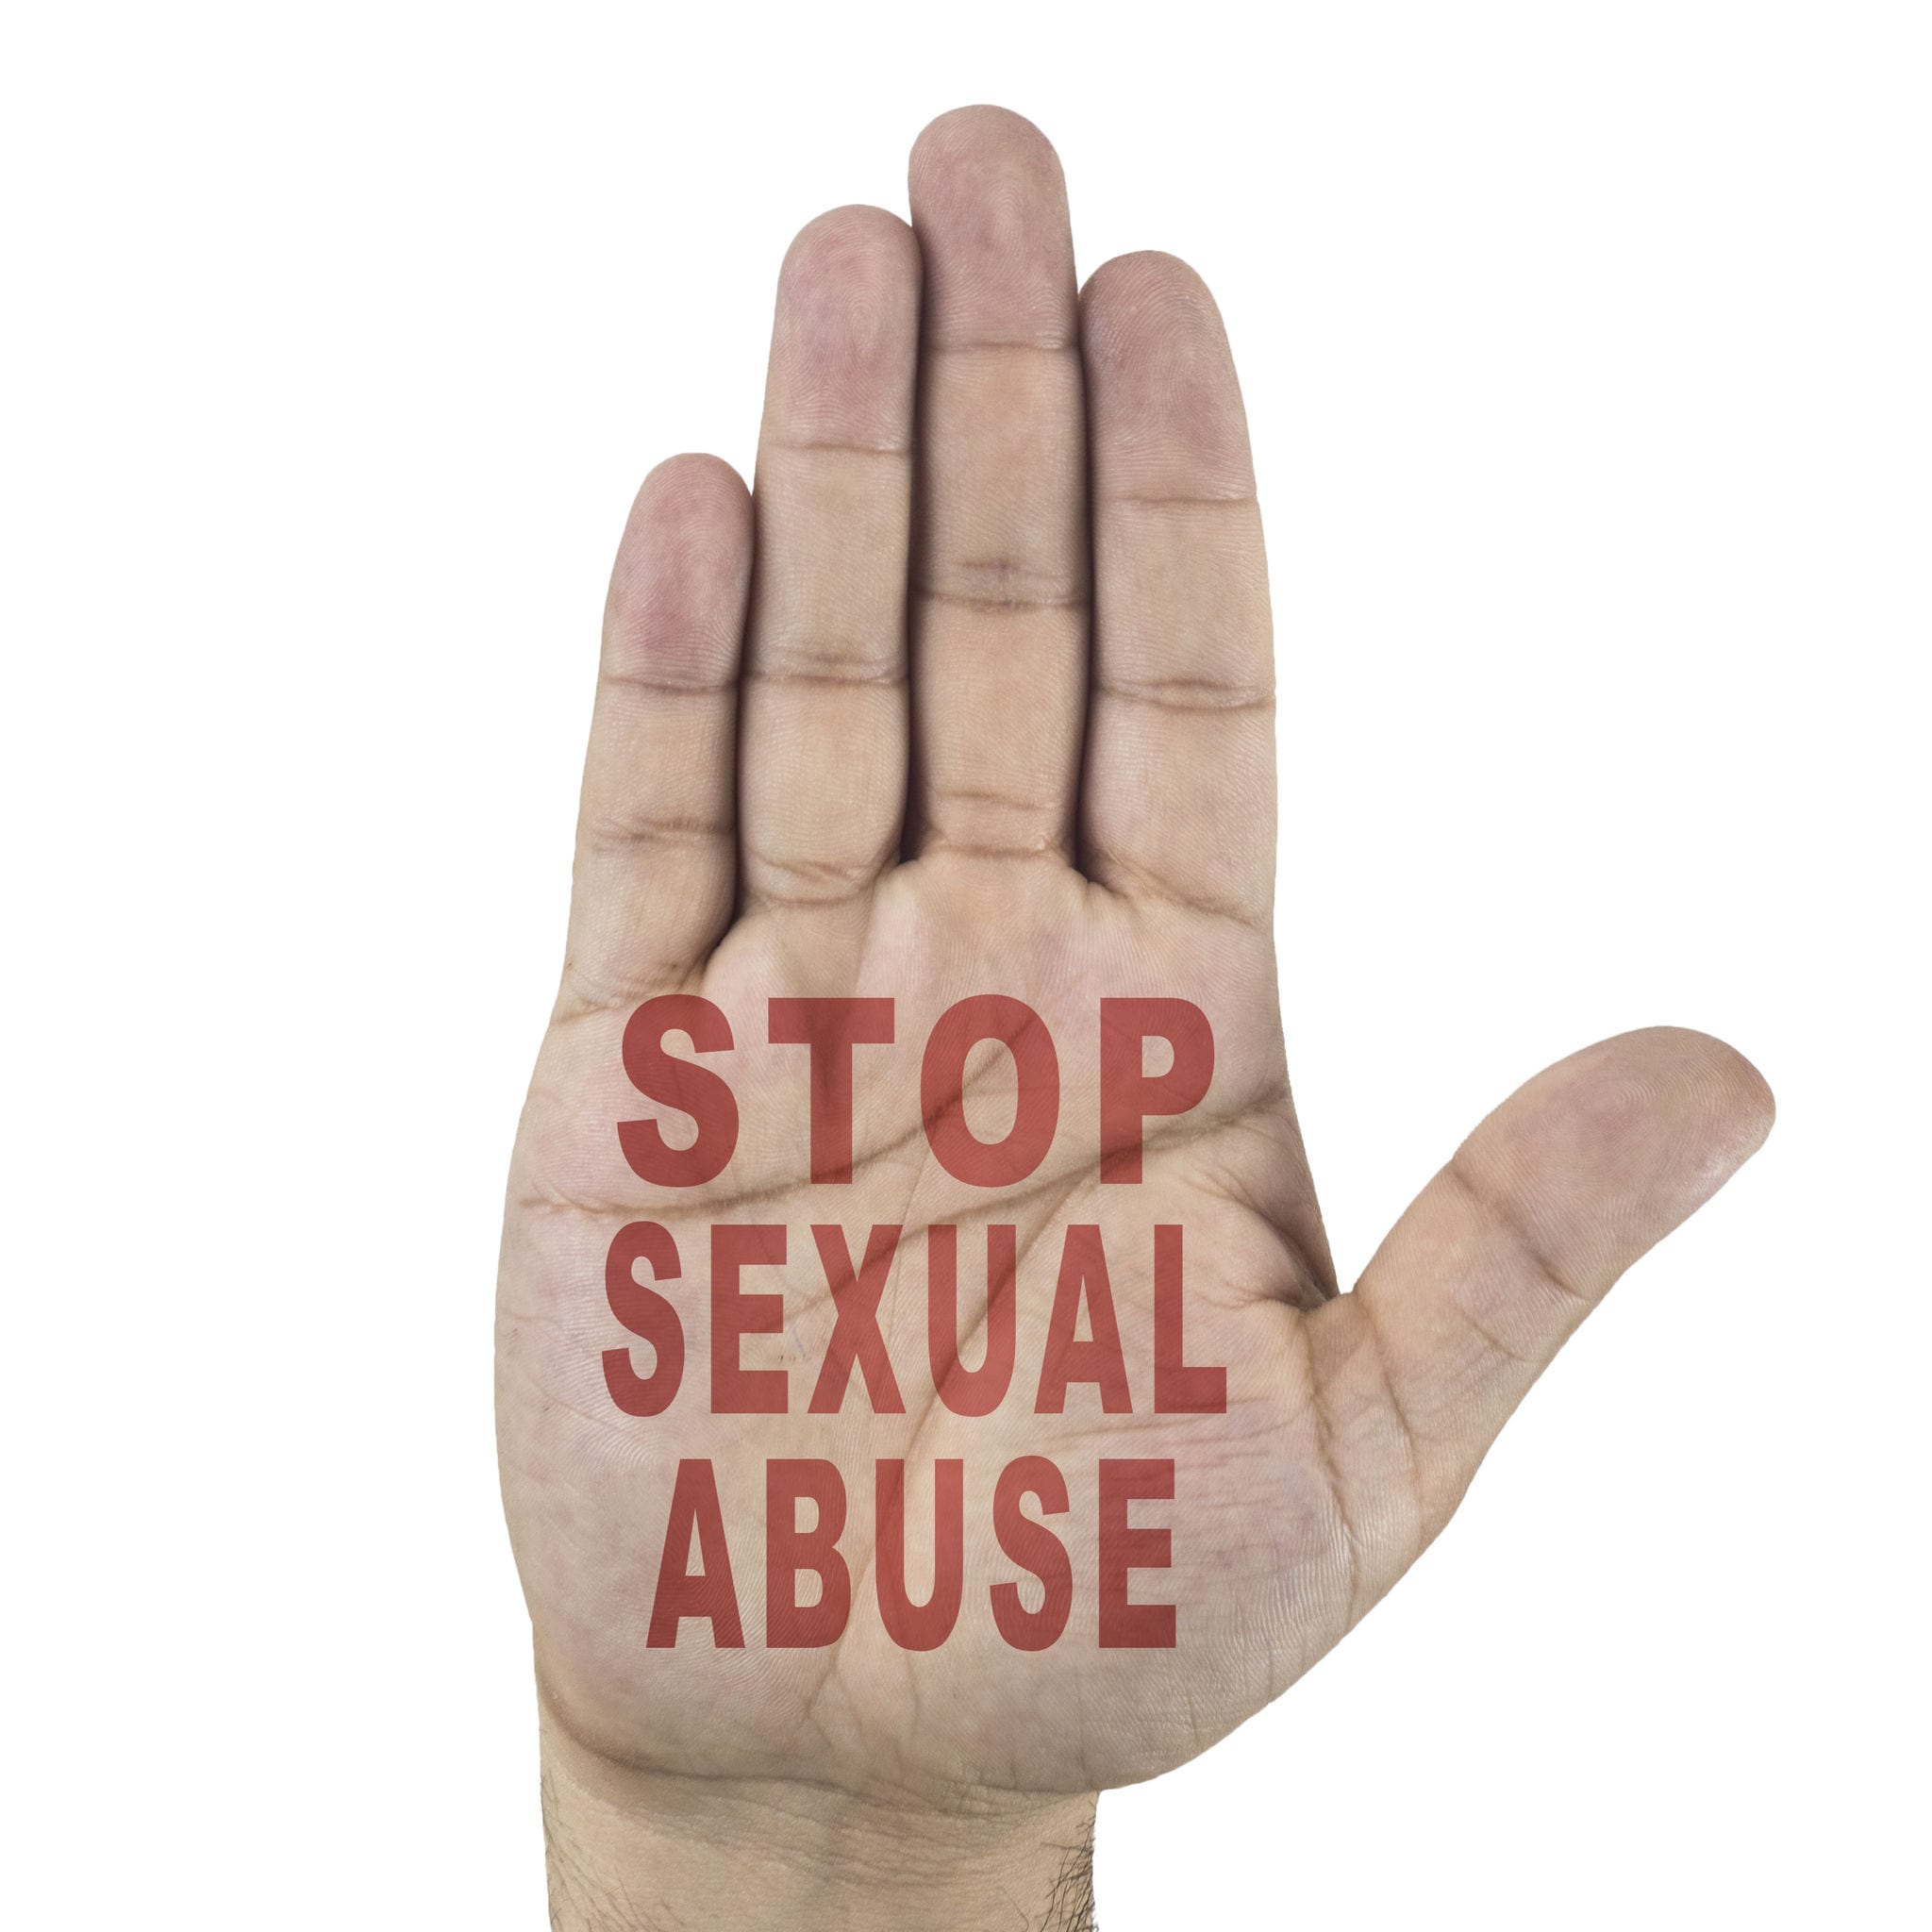 Illinois Clergy Sexual Abuse